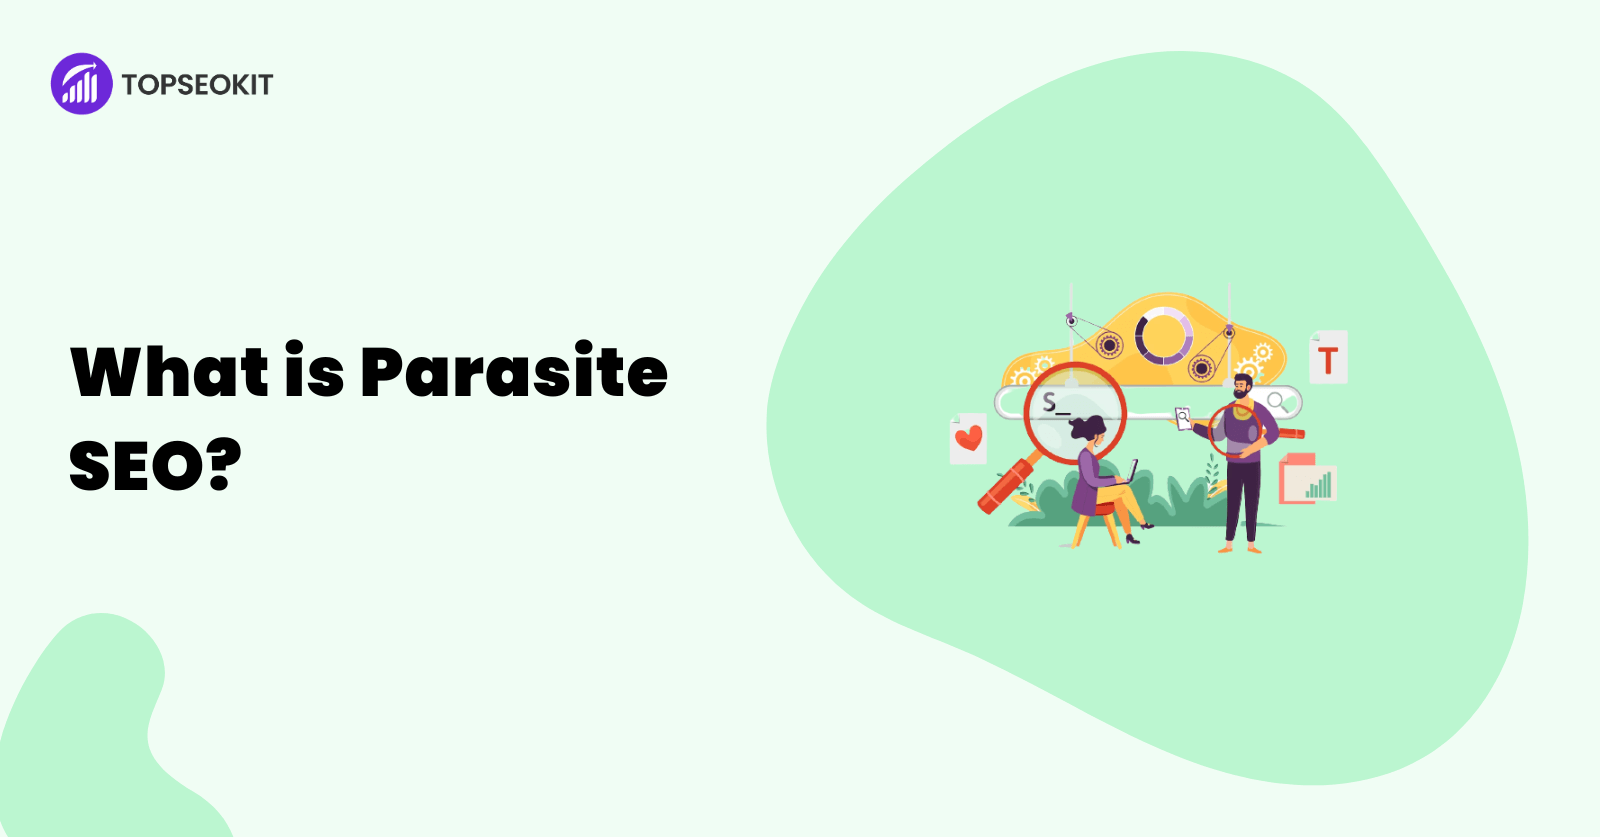 Parasite SEO: The Cunning Tactic to Exploit Your Competitors’ Rankings